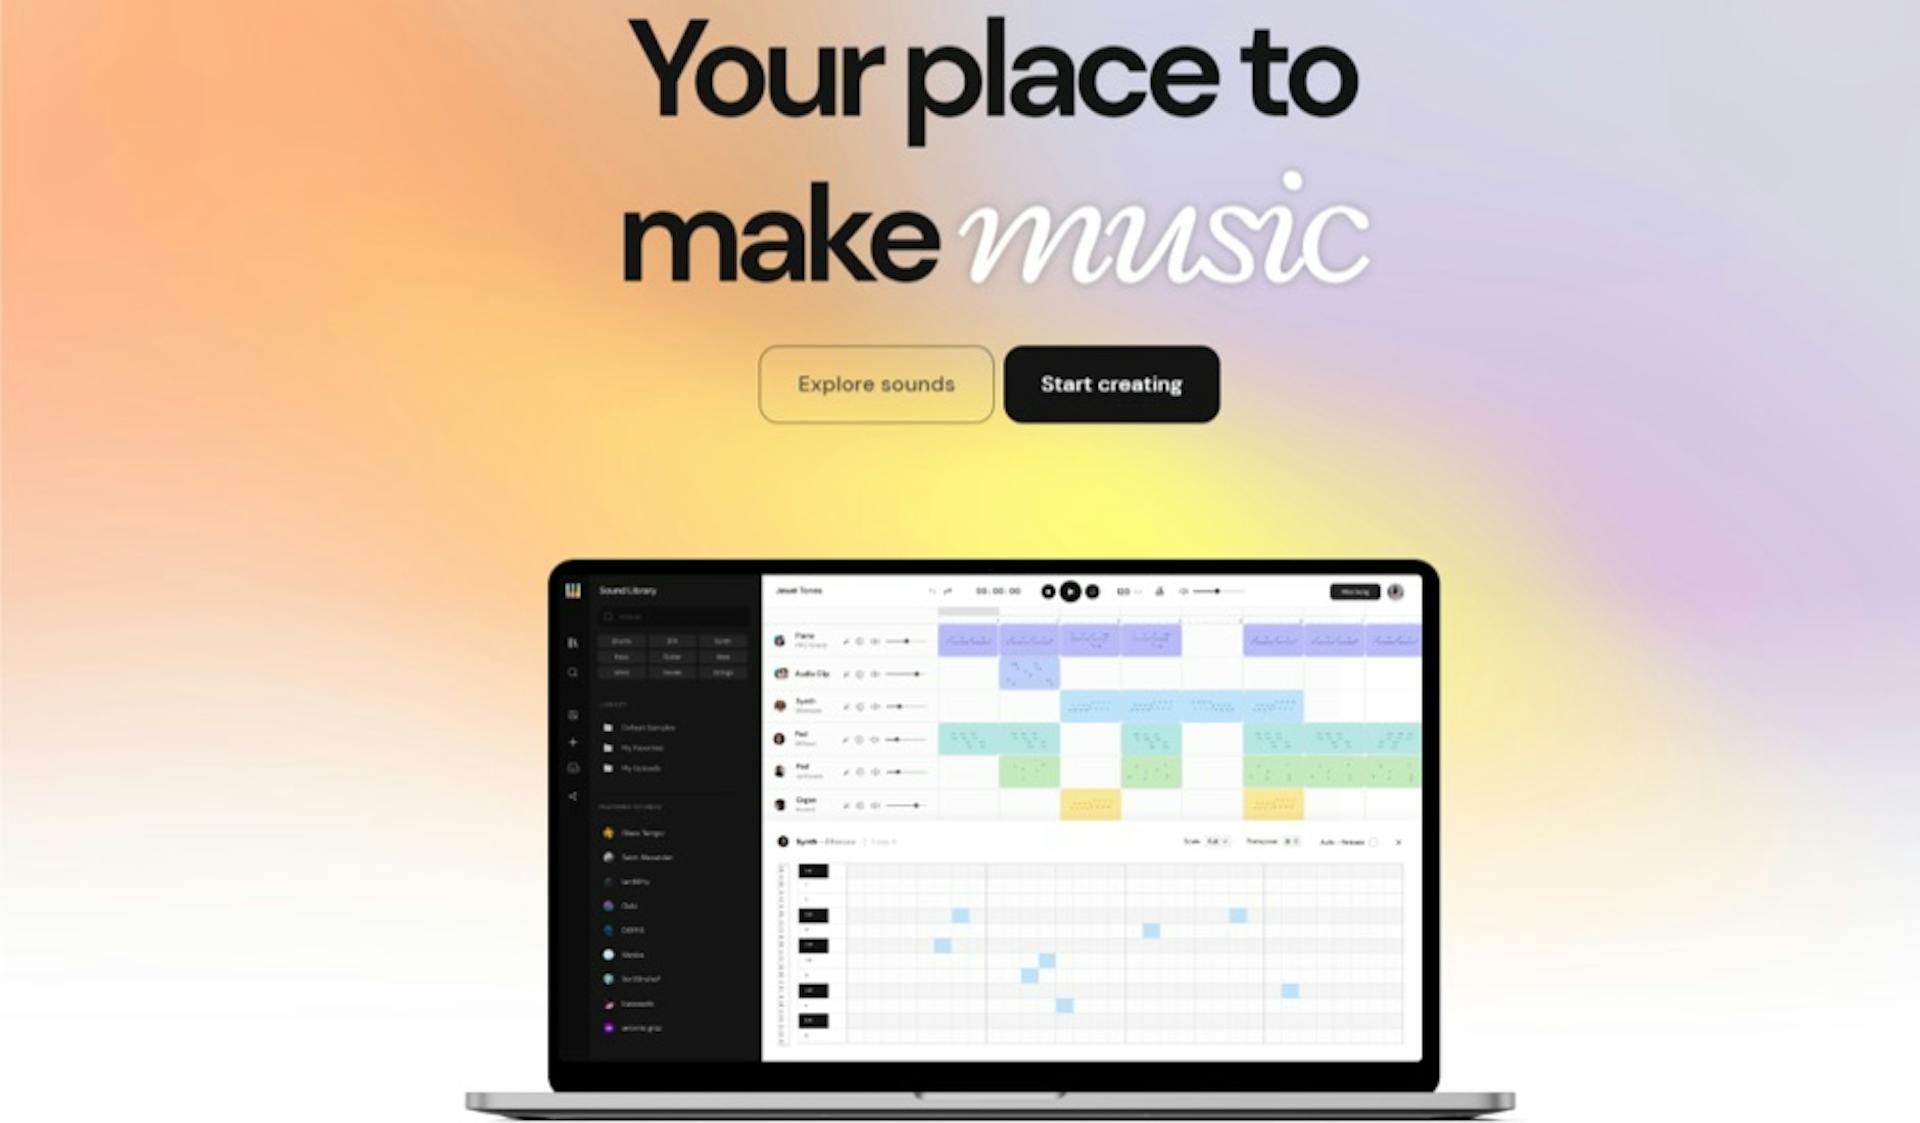 Arpeggi is a project where musicians create music together in a decentralized environment. / Source: arpeggi.io